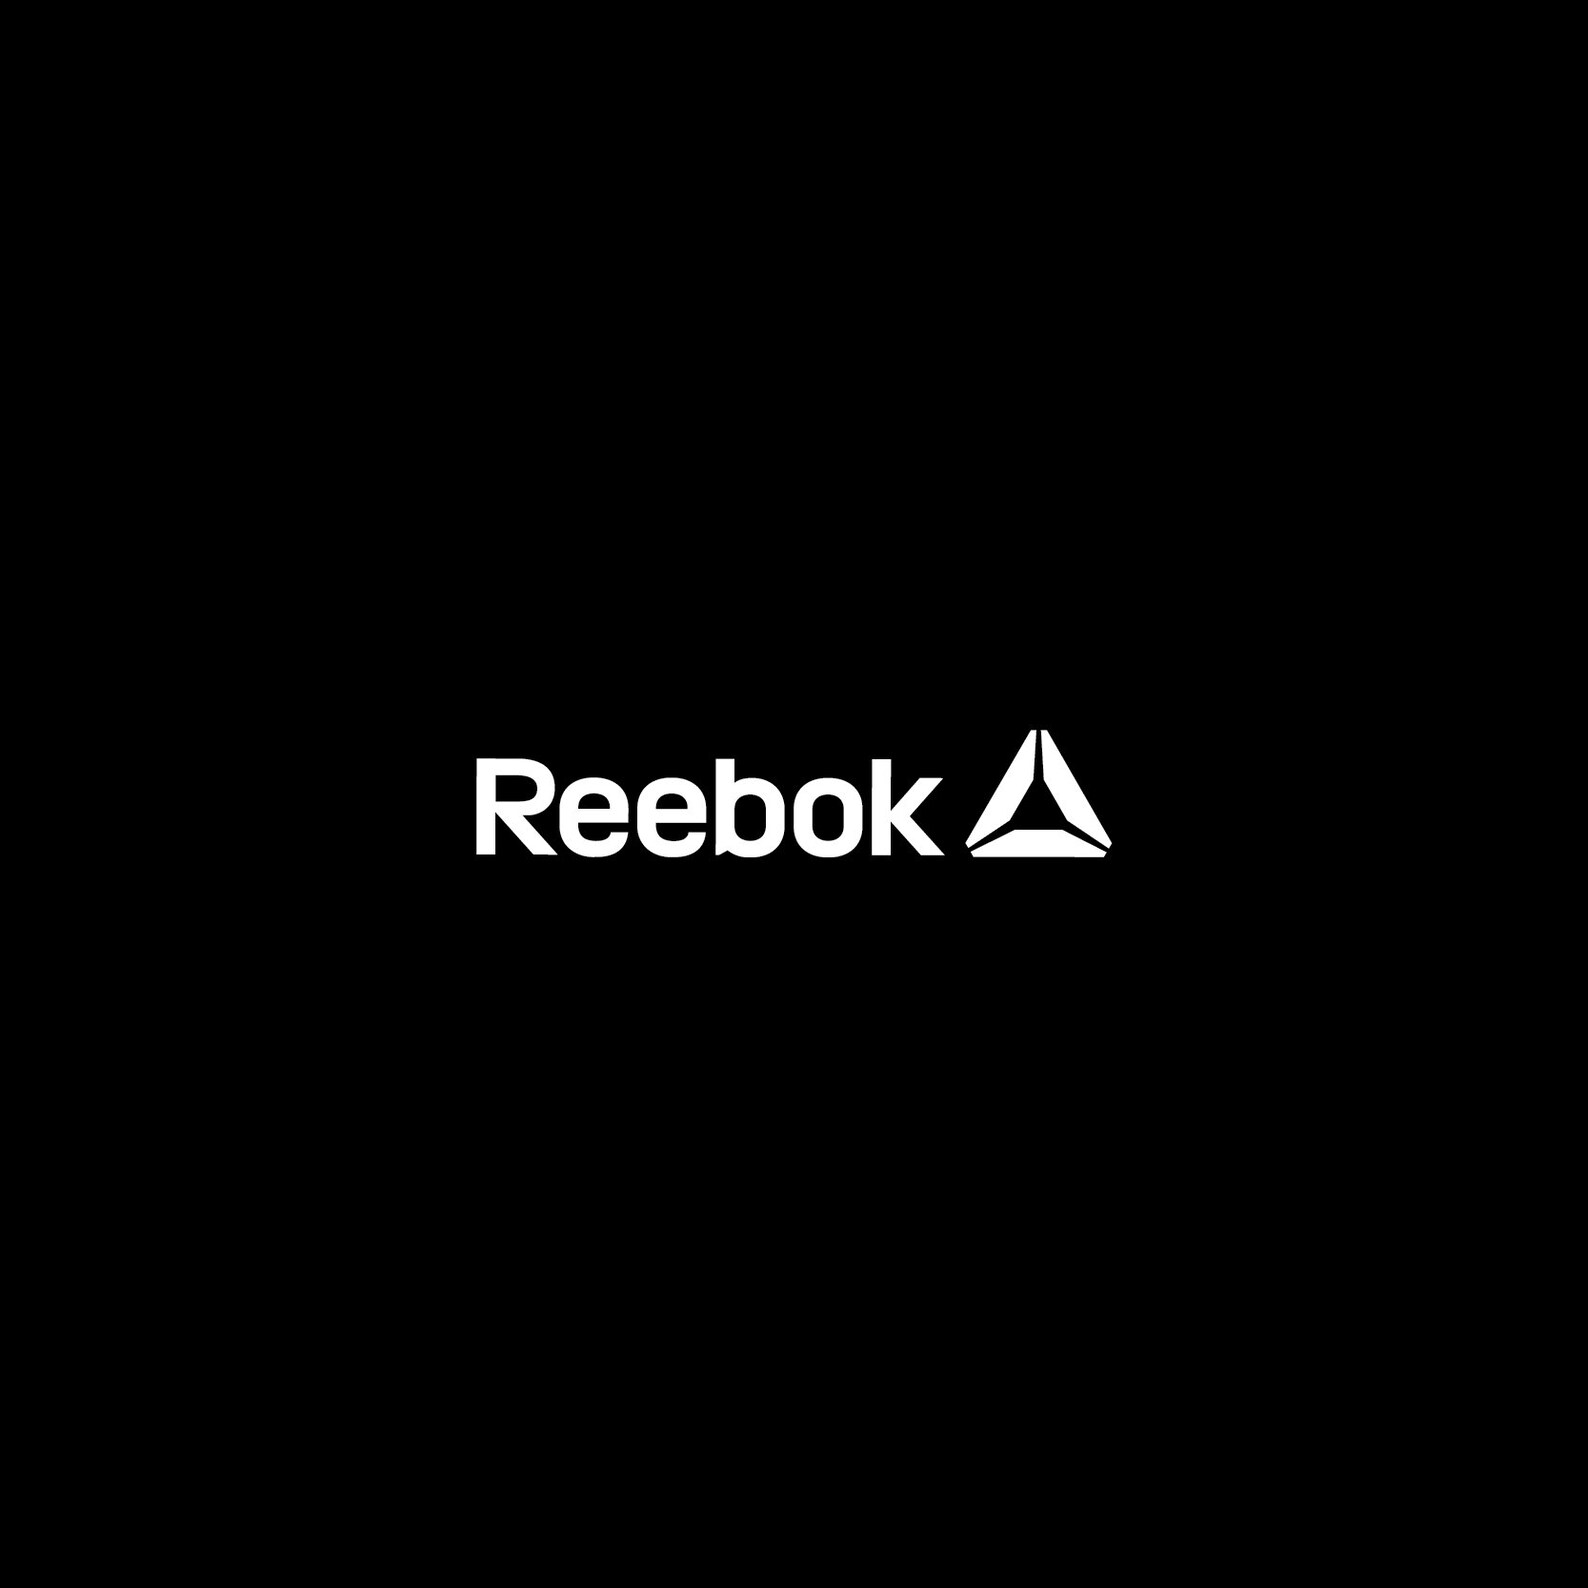 Reebok Logo SVG PNG VECTOR for cricut and silhouette | Etsy